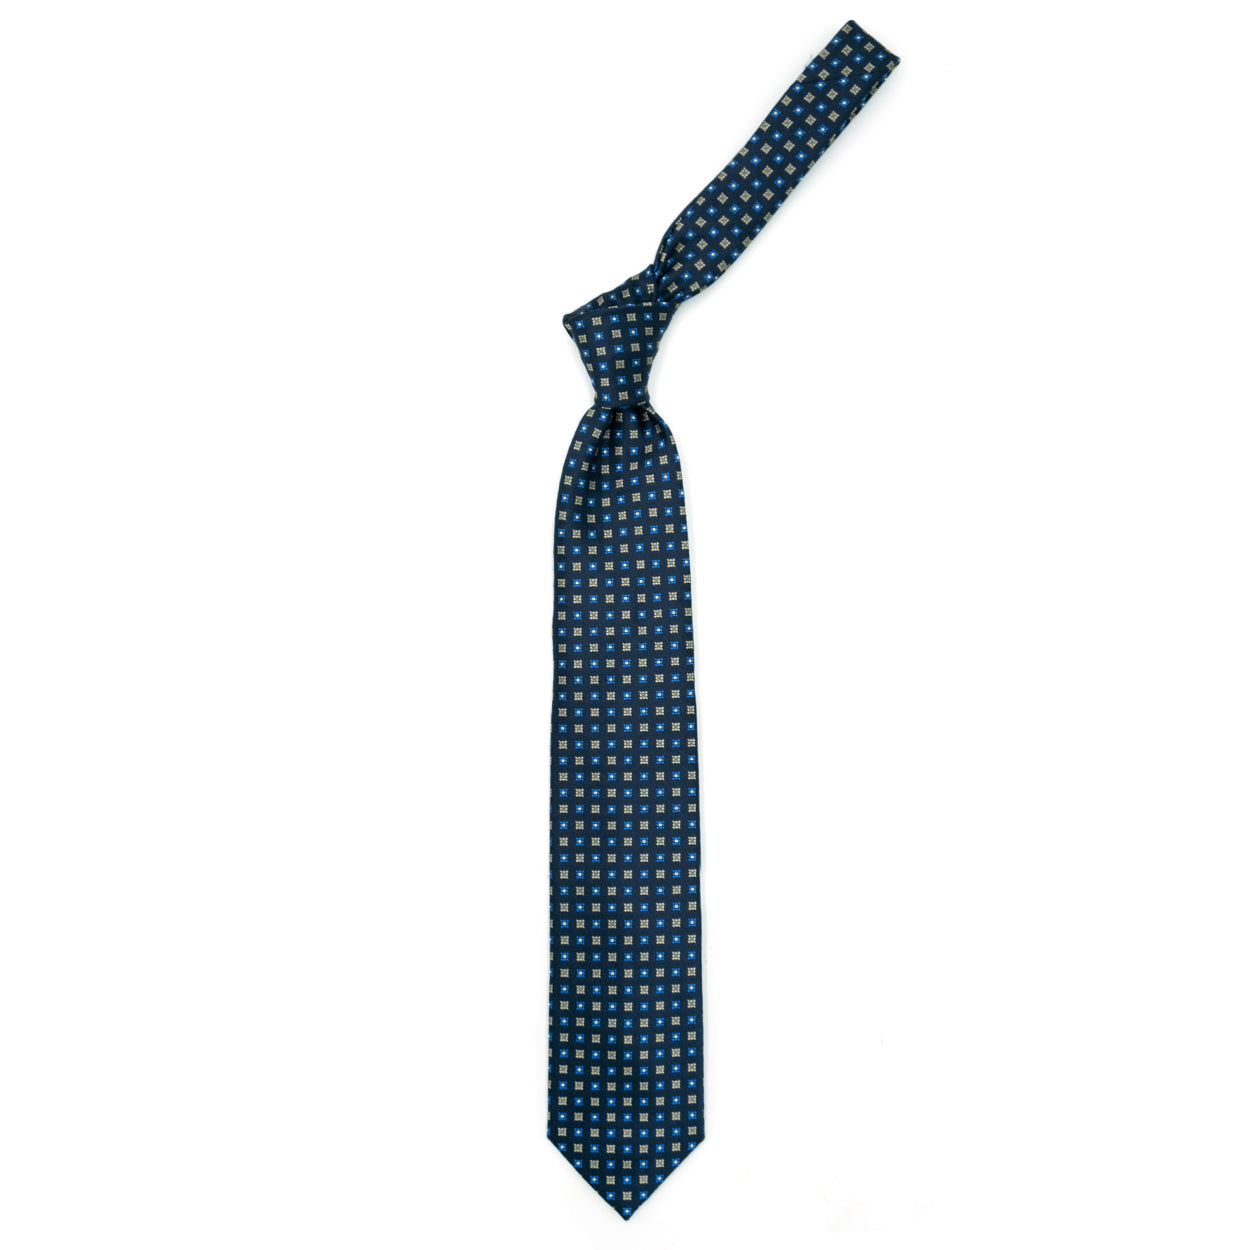 Blue tie with blue and gold squares